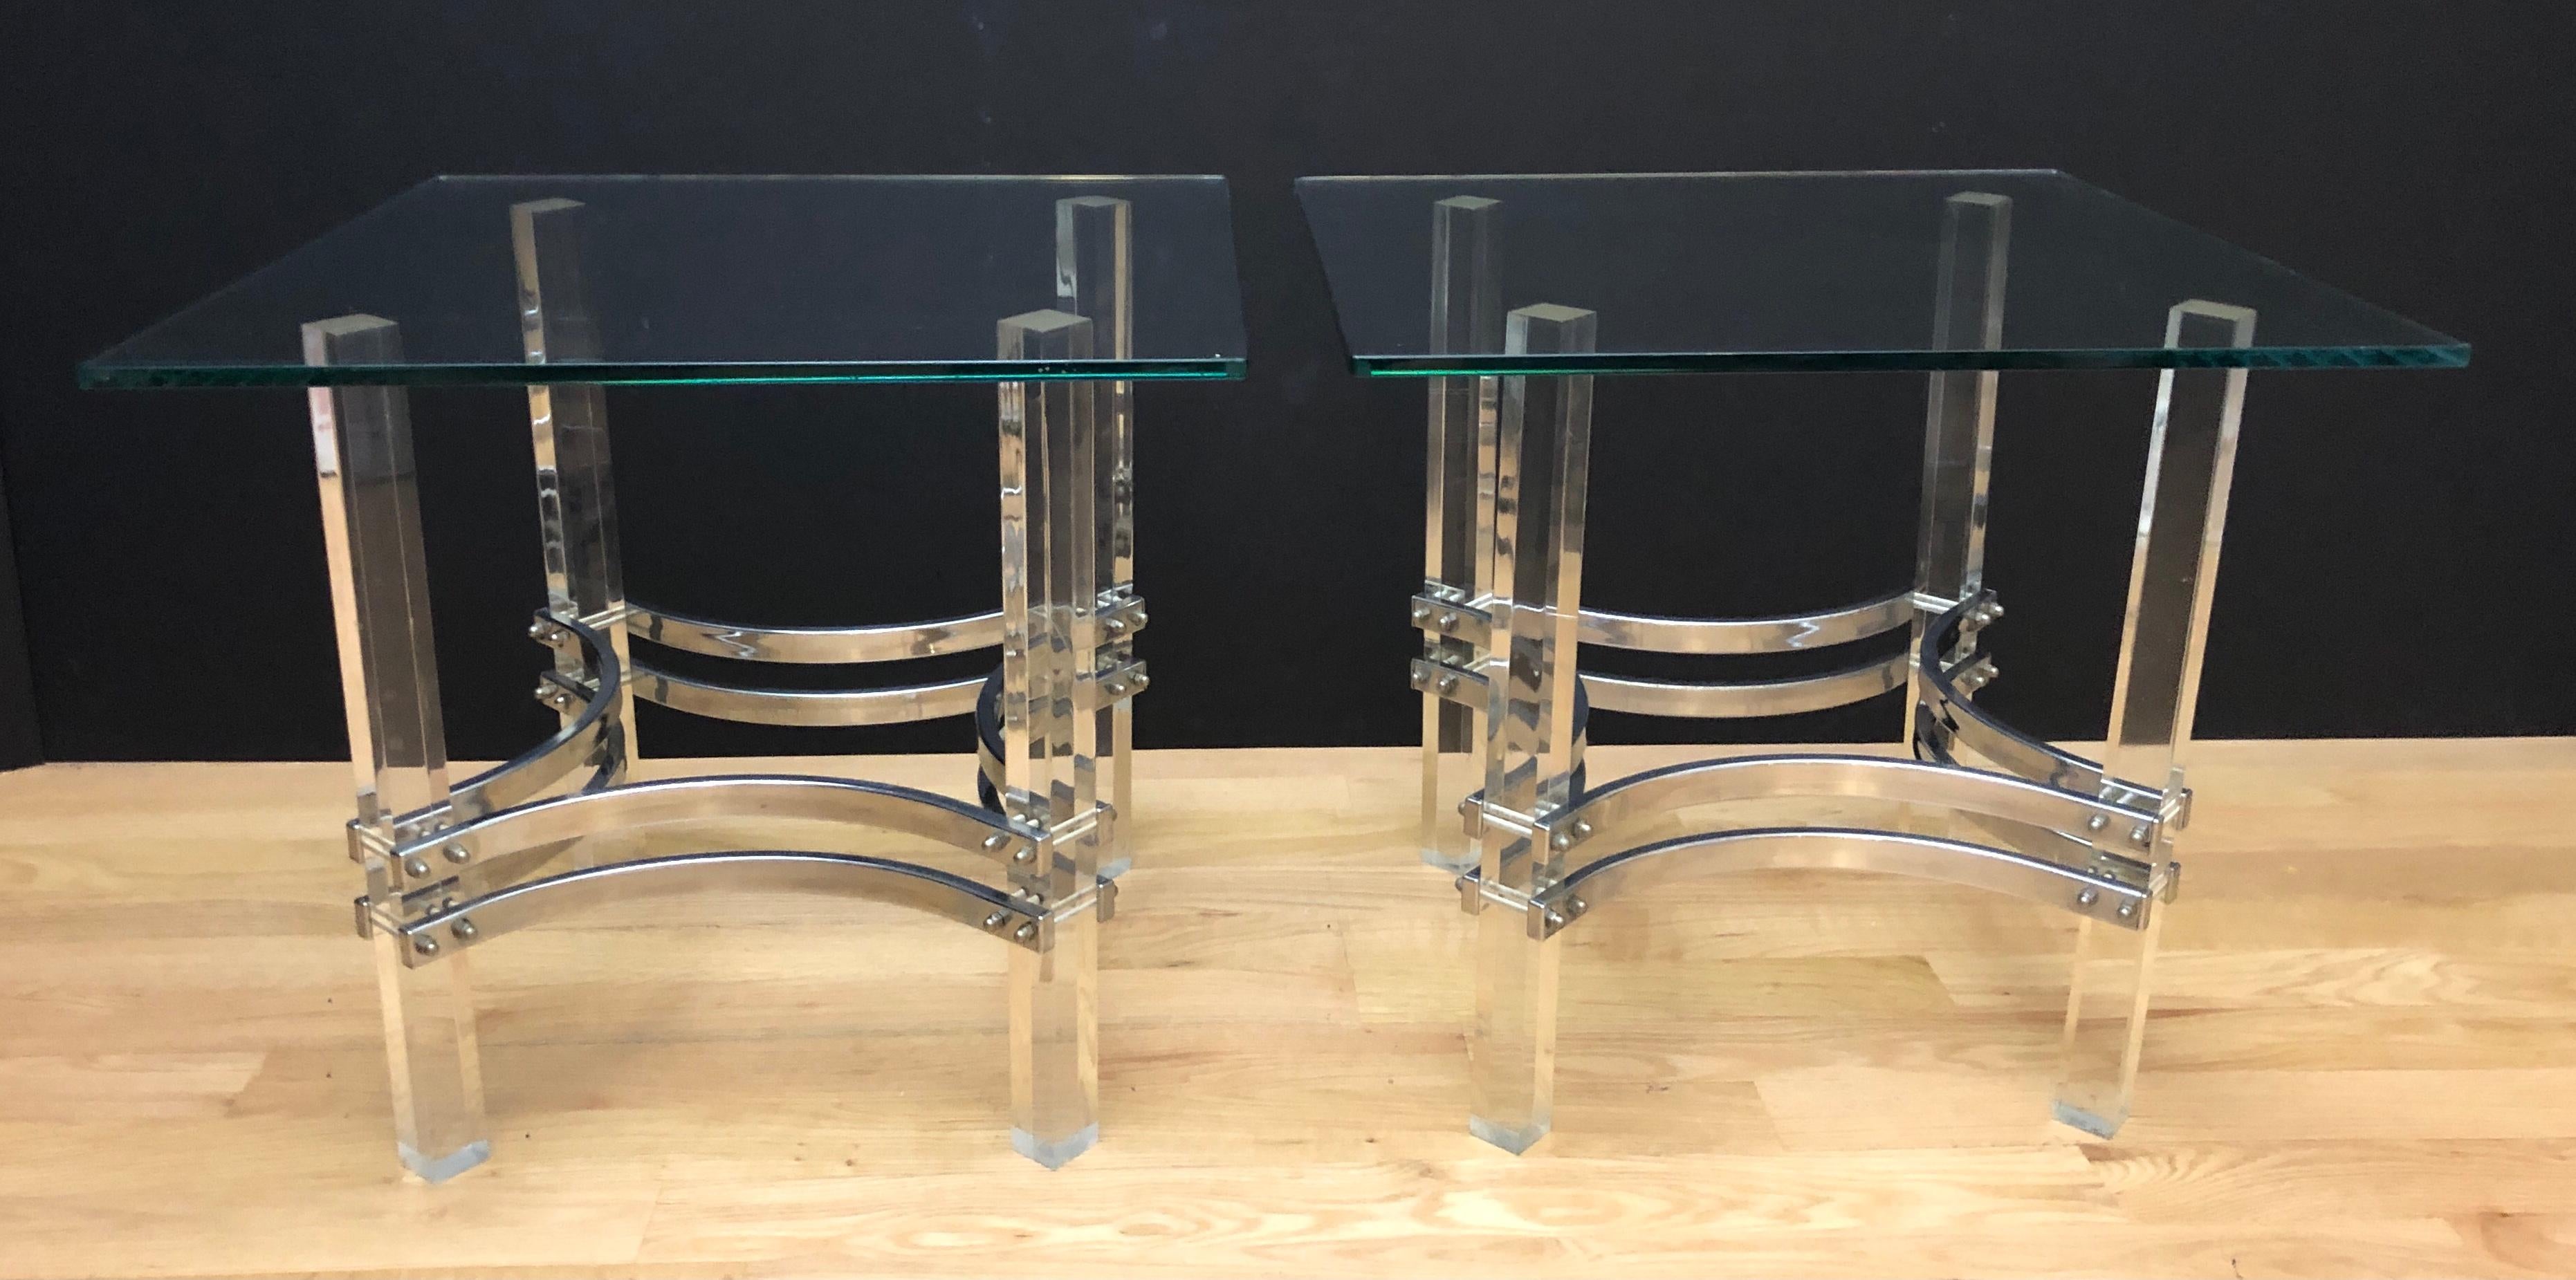 Pair of Charles Hollis Jones Mid-Century Modern Lucite chrome and glass side tables. Square lucite legs supported by curved chrome stretchers. Glass tops.